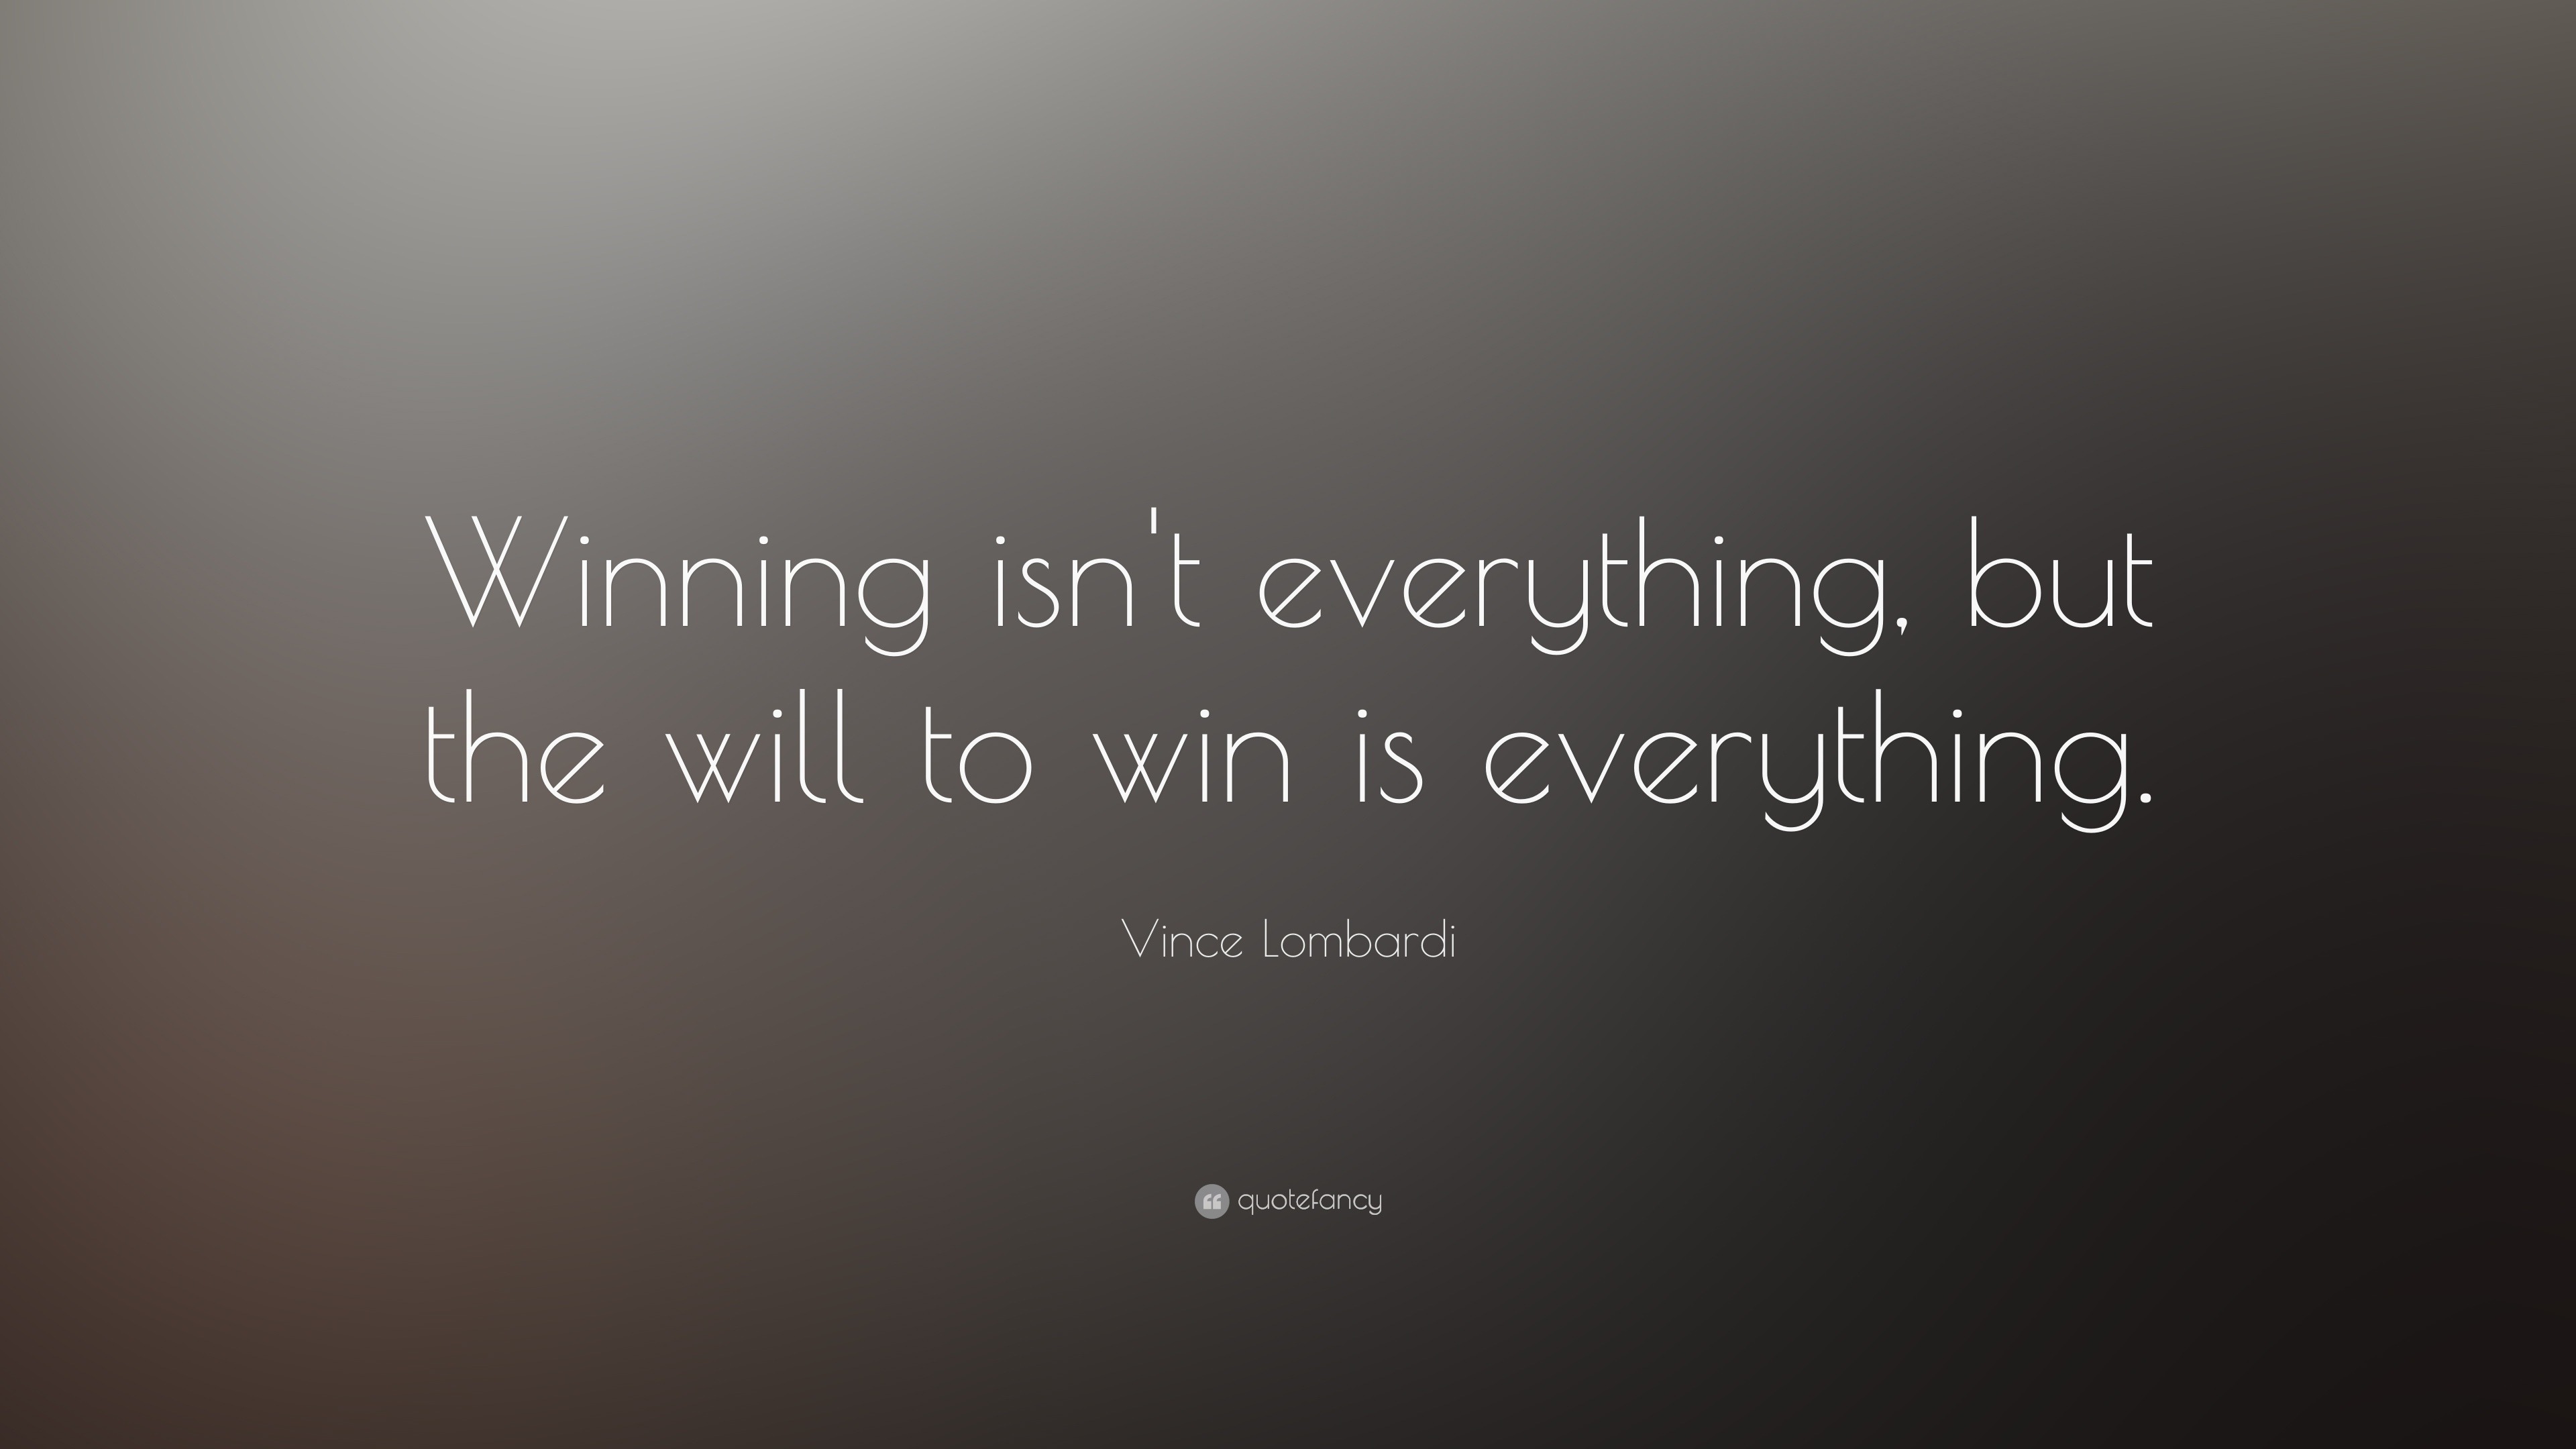 Vince Lombardi Quote: “Winning isn’t everything, but the will to win is